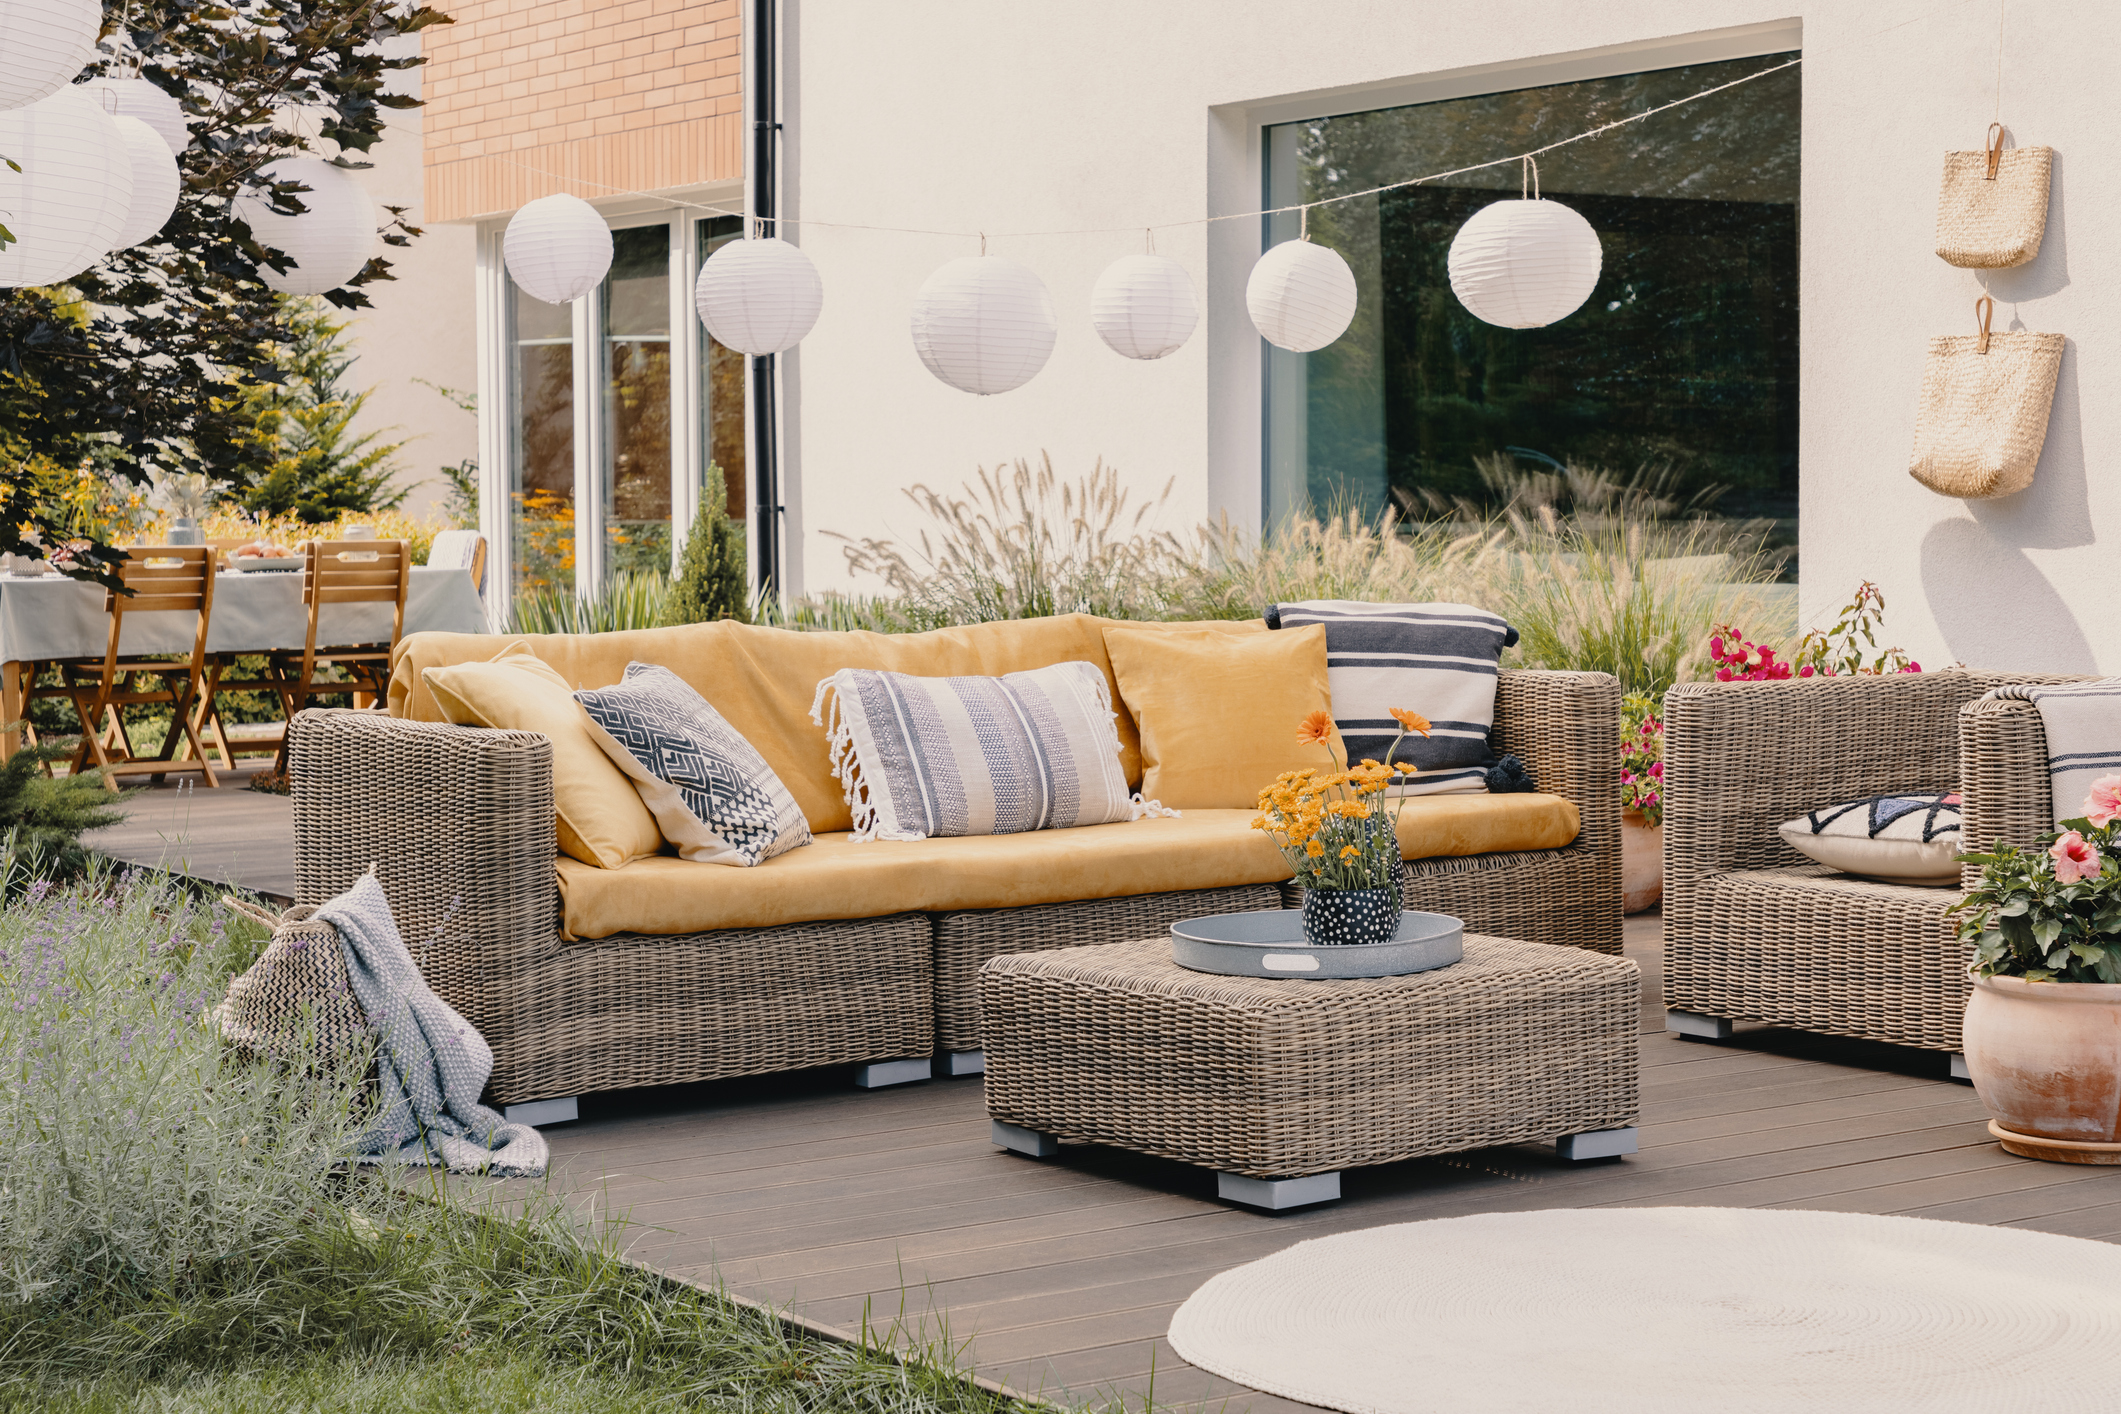 Garden furniture with yellow cushions on the three-seater garden sofa